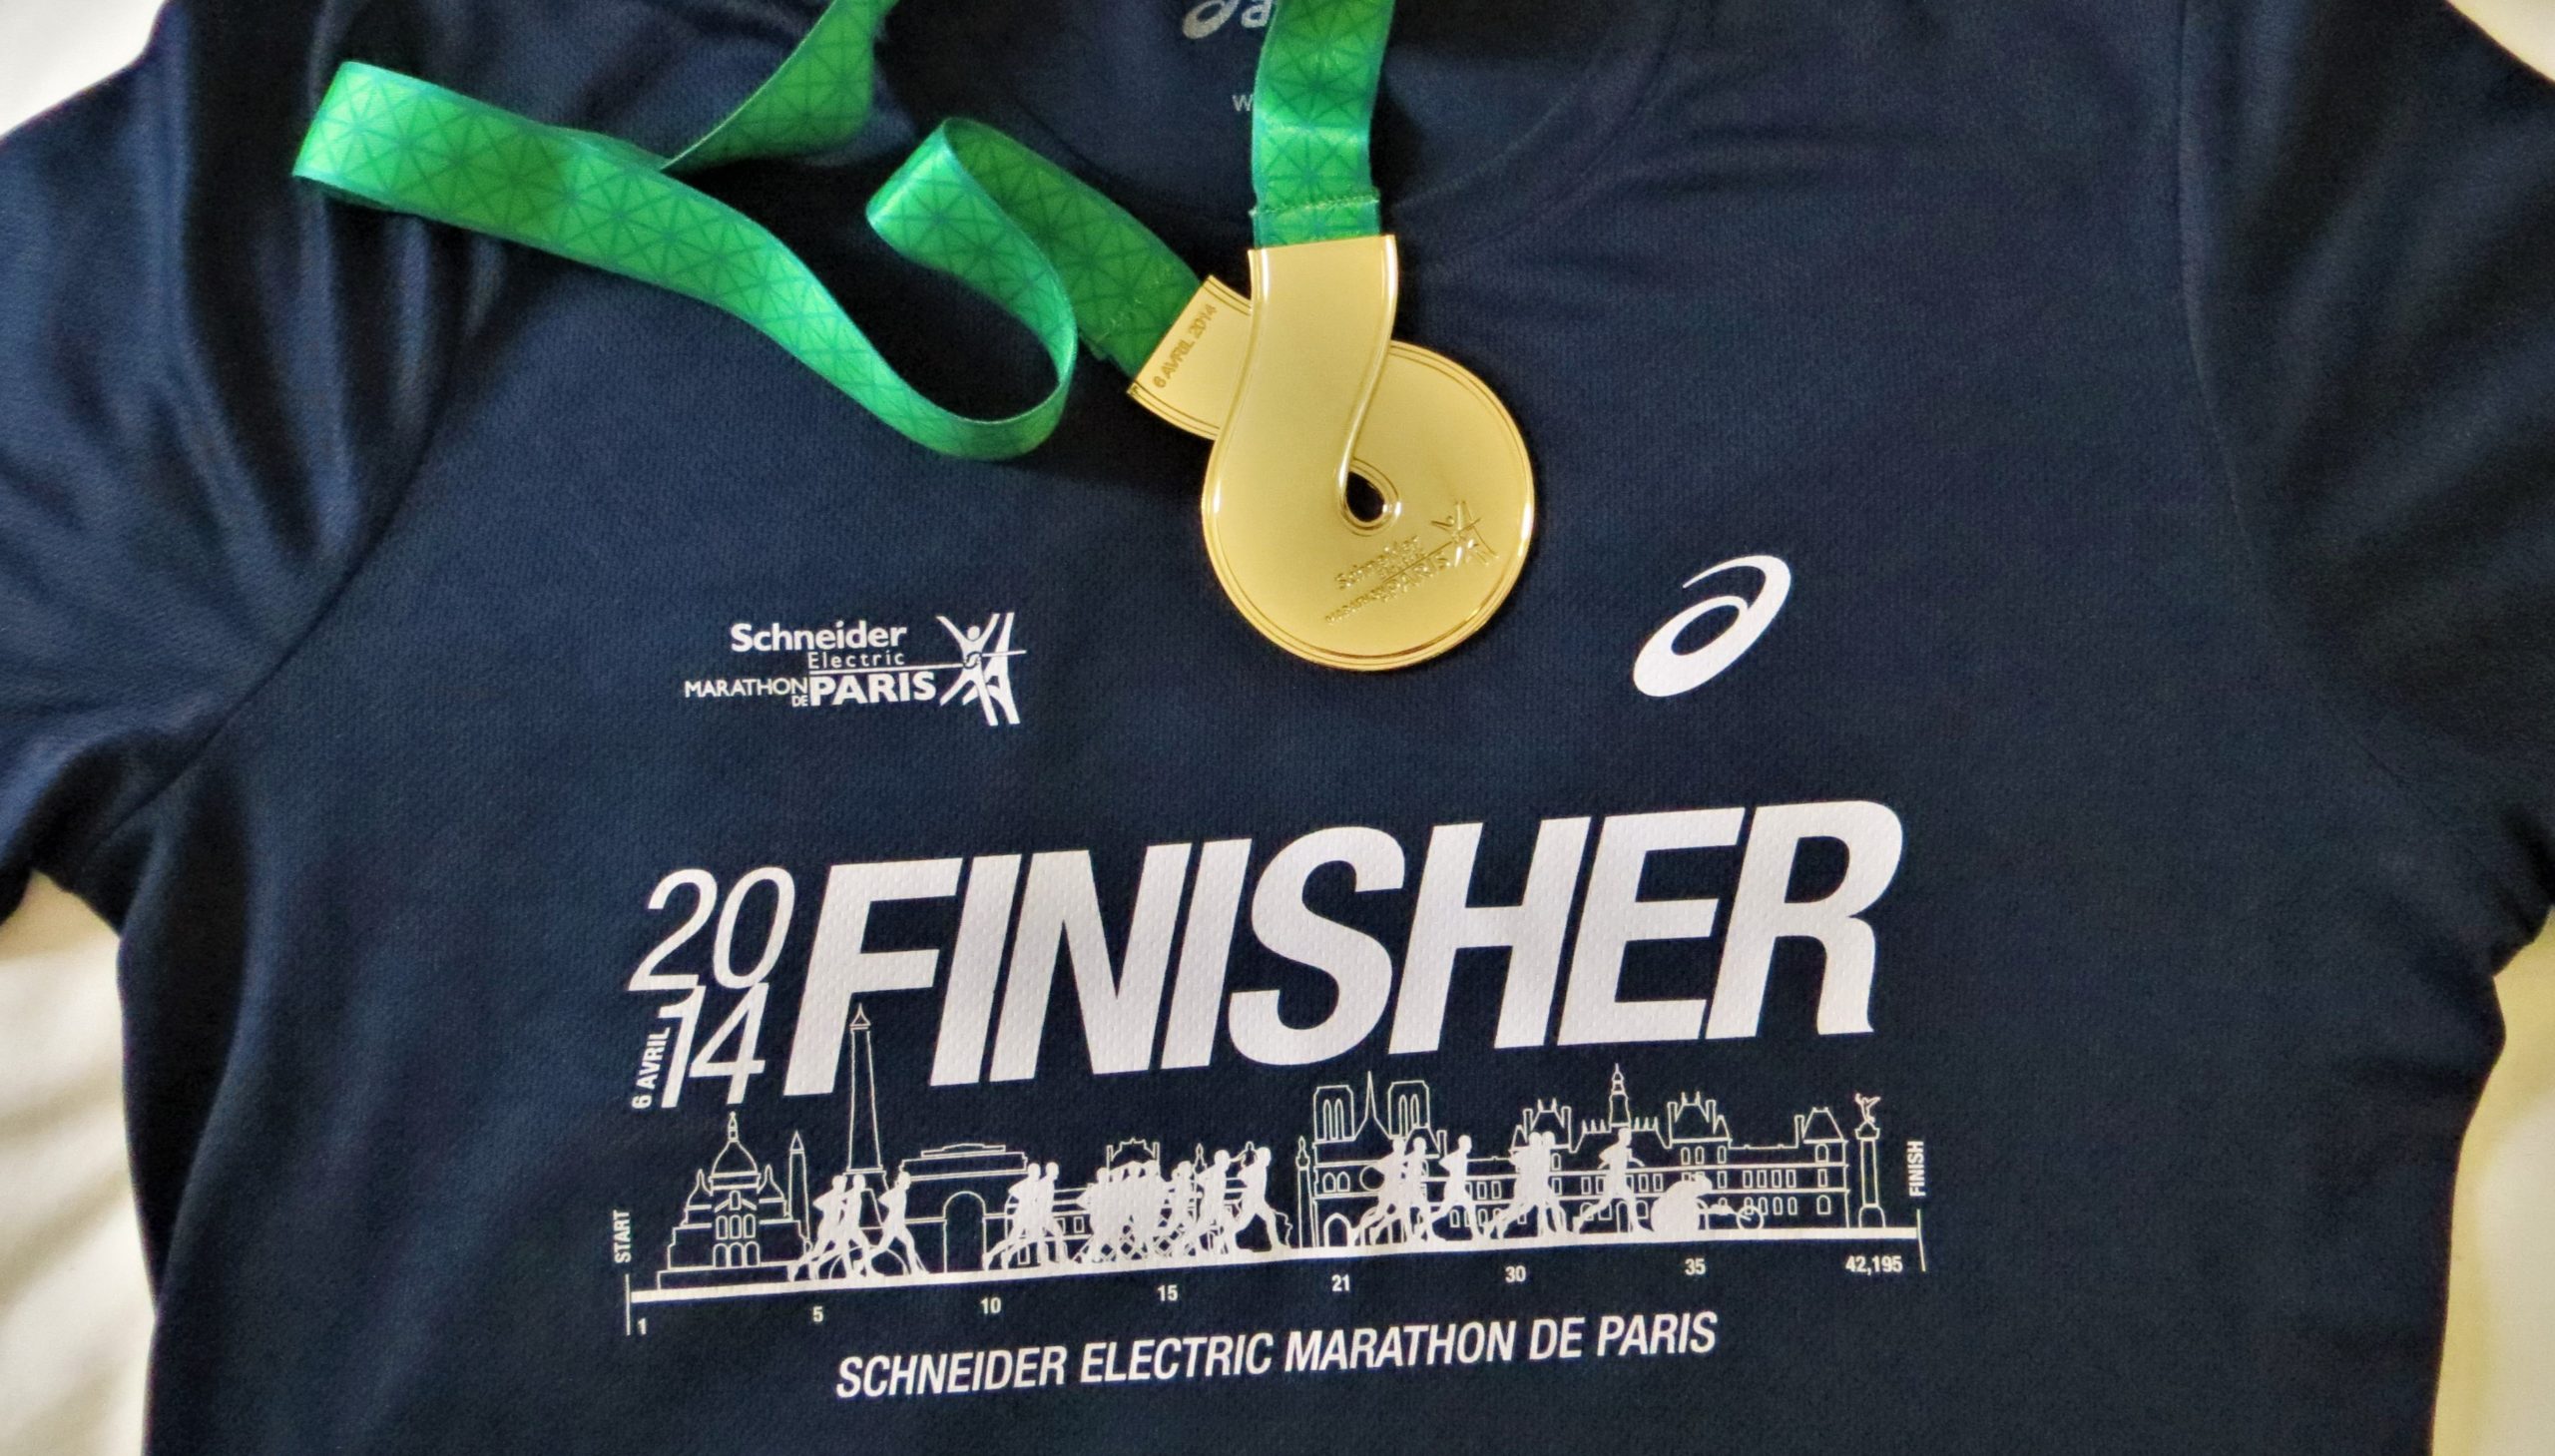 Finisher t-shirt and medal from Paris Marathon 2014